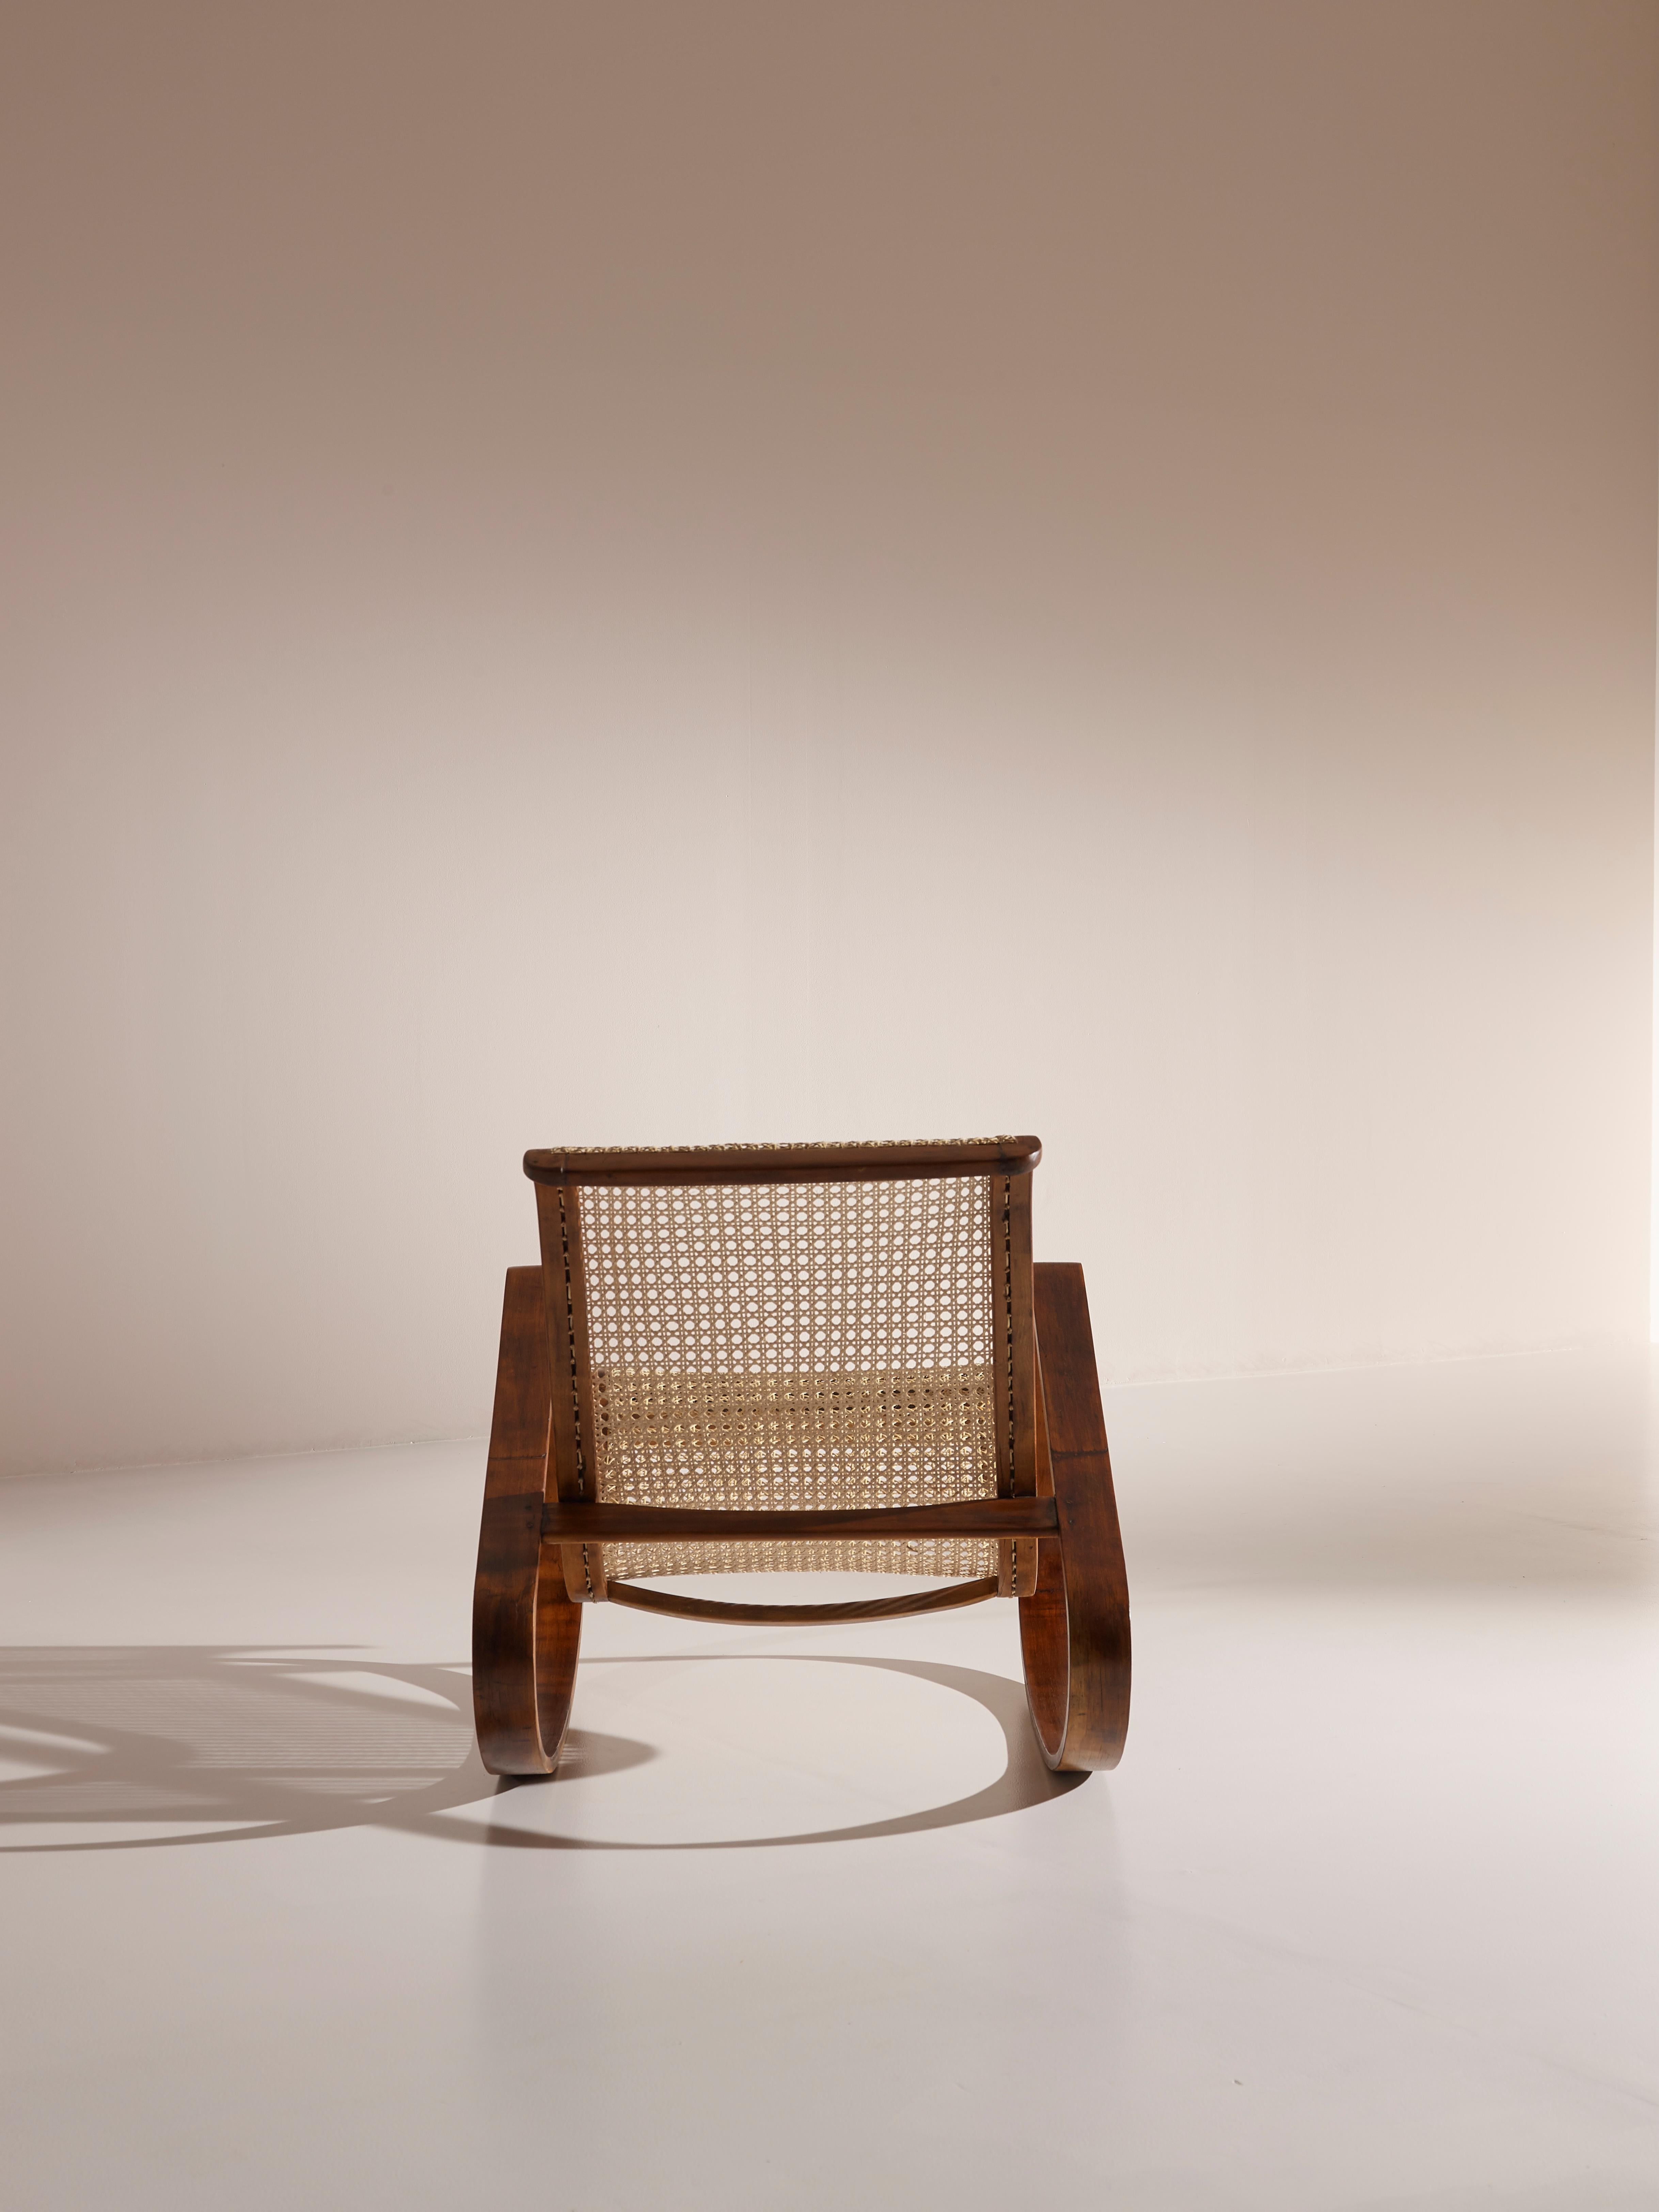 Caning Caned Rocking Chair Made by Porino, Italy, 1930s For Sale